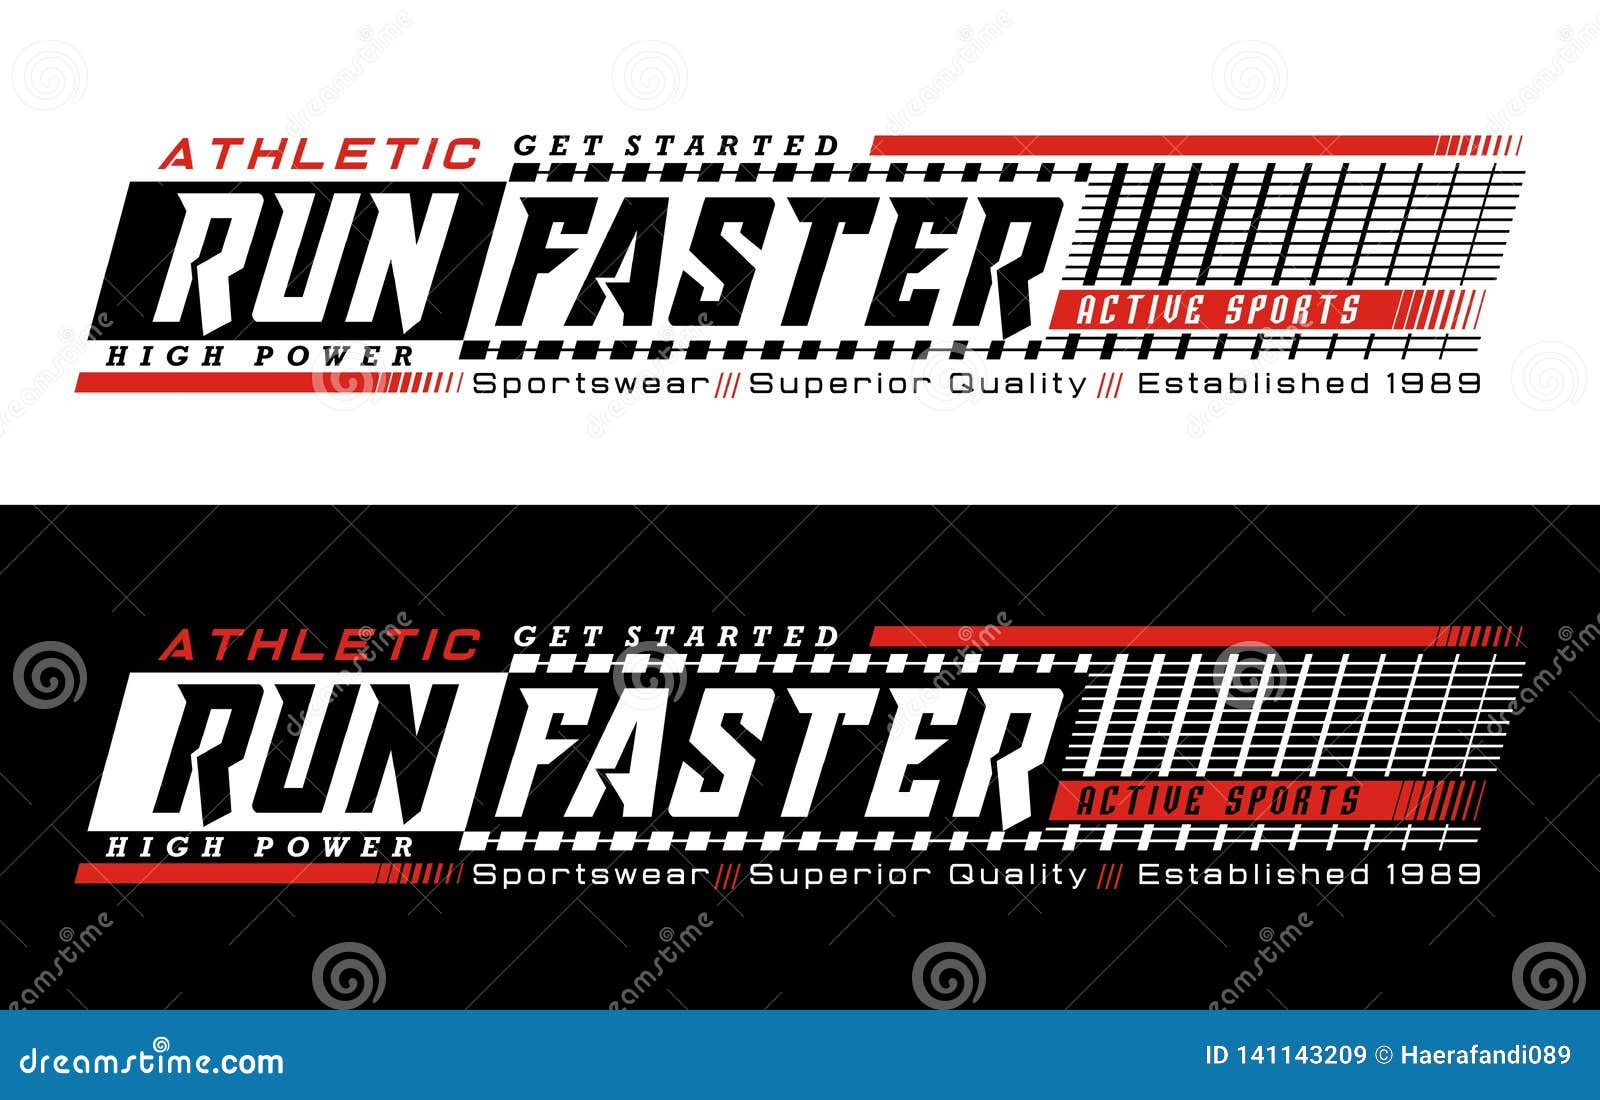 Run Faster Athletic Sport Typography Design with a Background of Black  White Color Variants, Vector Image Illustrator Stock Vector - Illustration  of pattern, city: 141143209